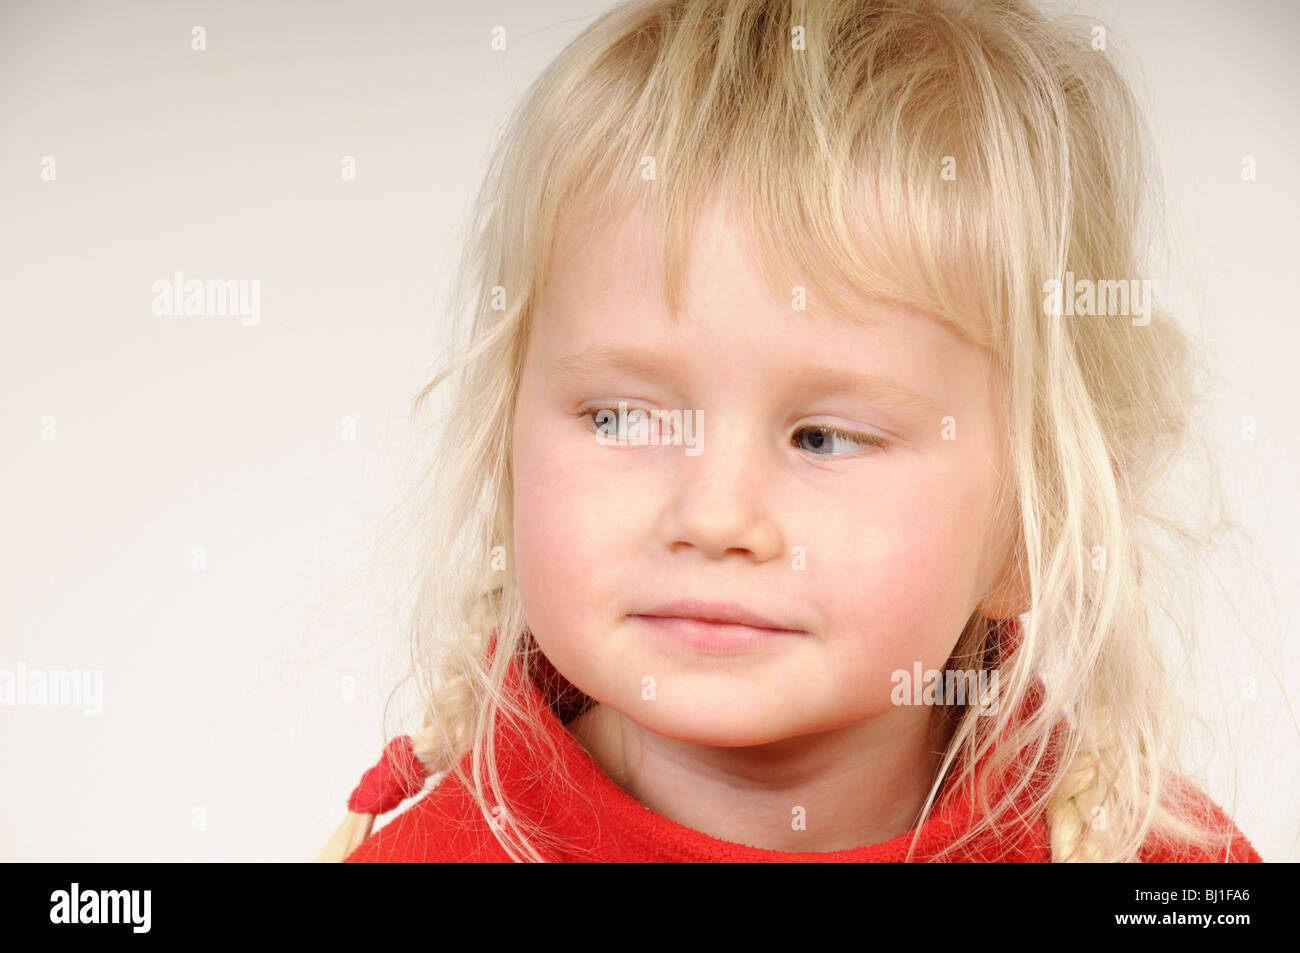 Stock photo of a blond haired four year old child looking to her right. Stock Photo